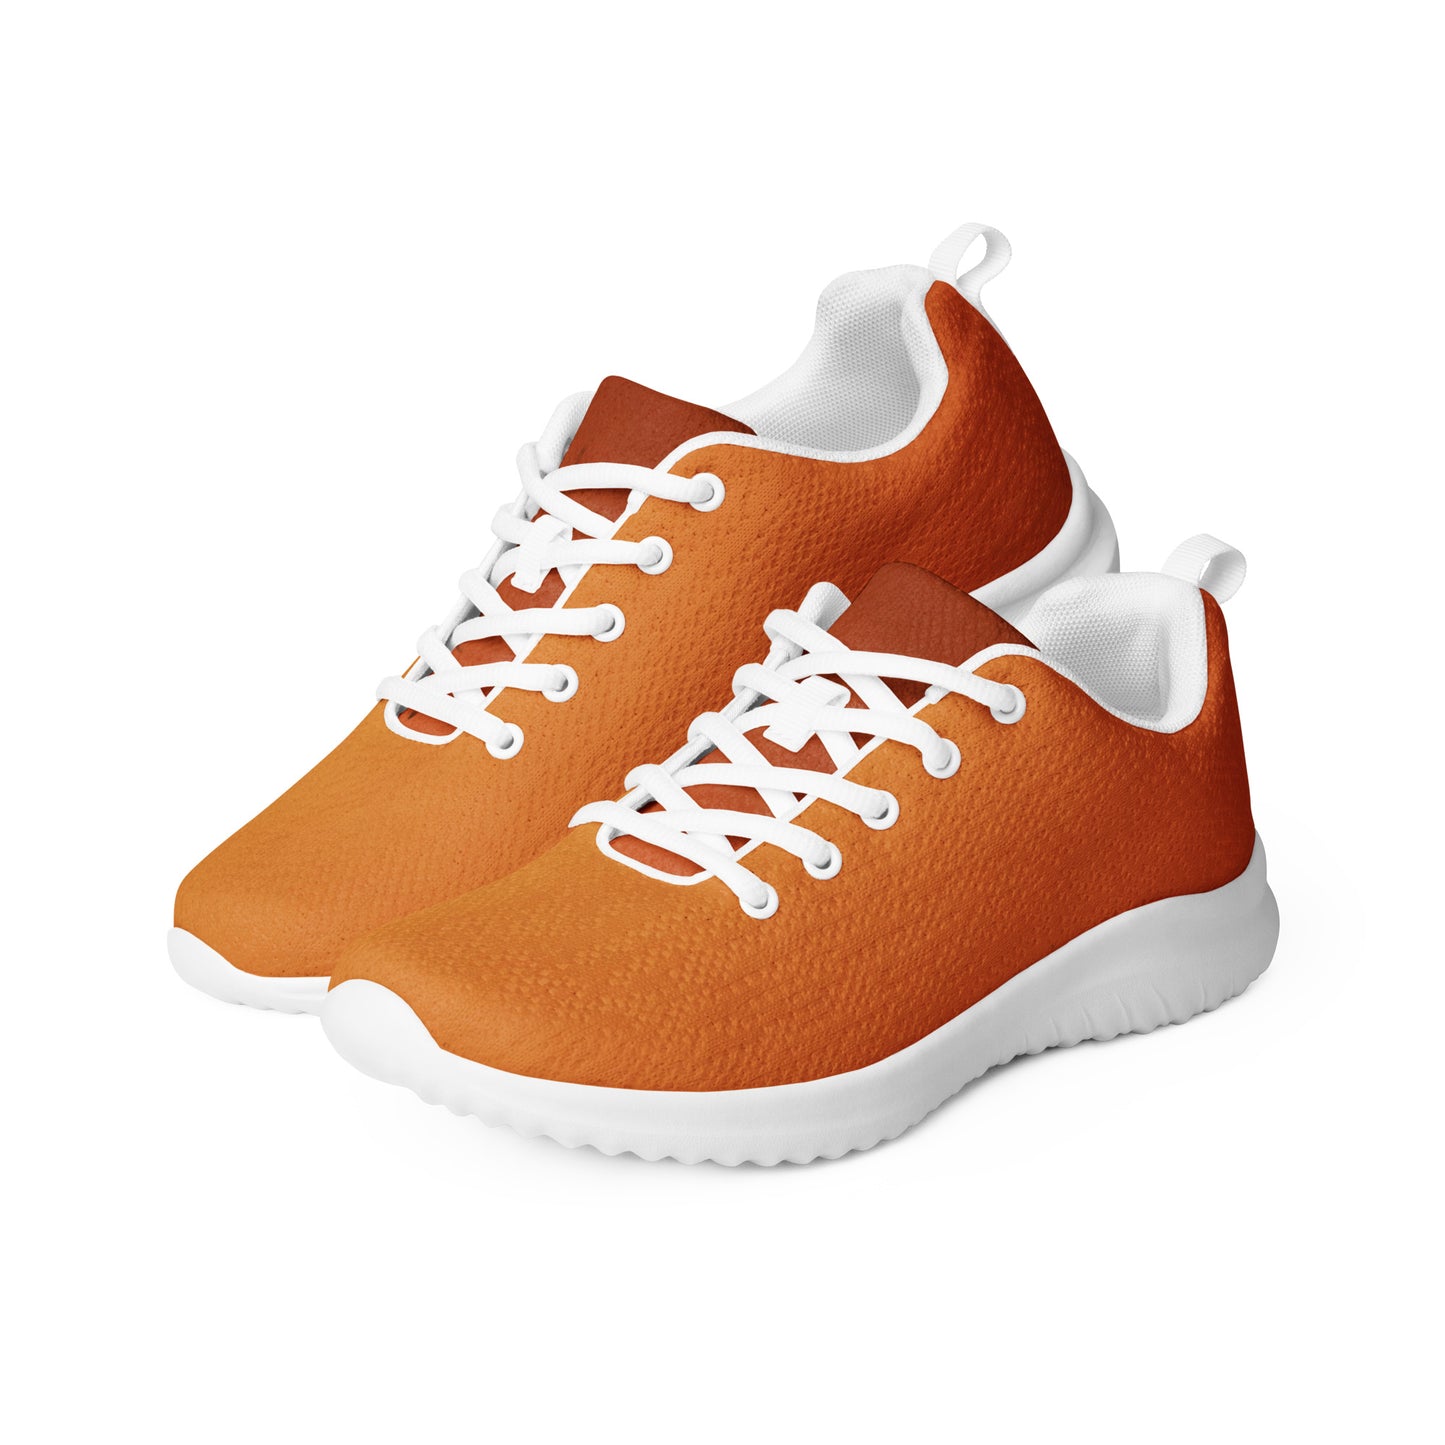 DASH Sunset Women’s Athletic Shoes Lightweight Breathable Design by IOBI Original Apparel